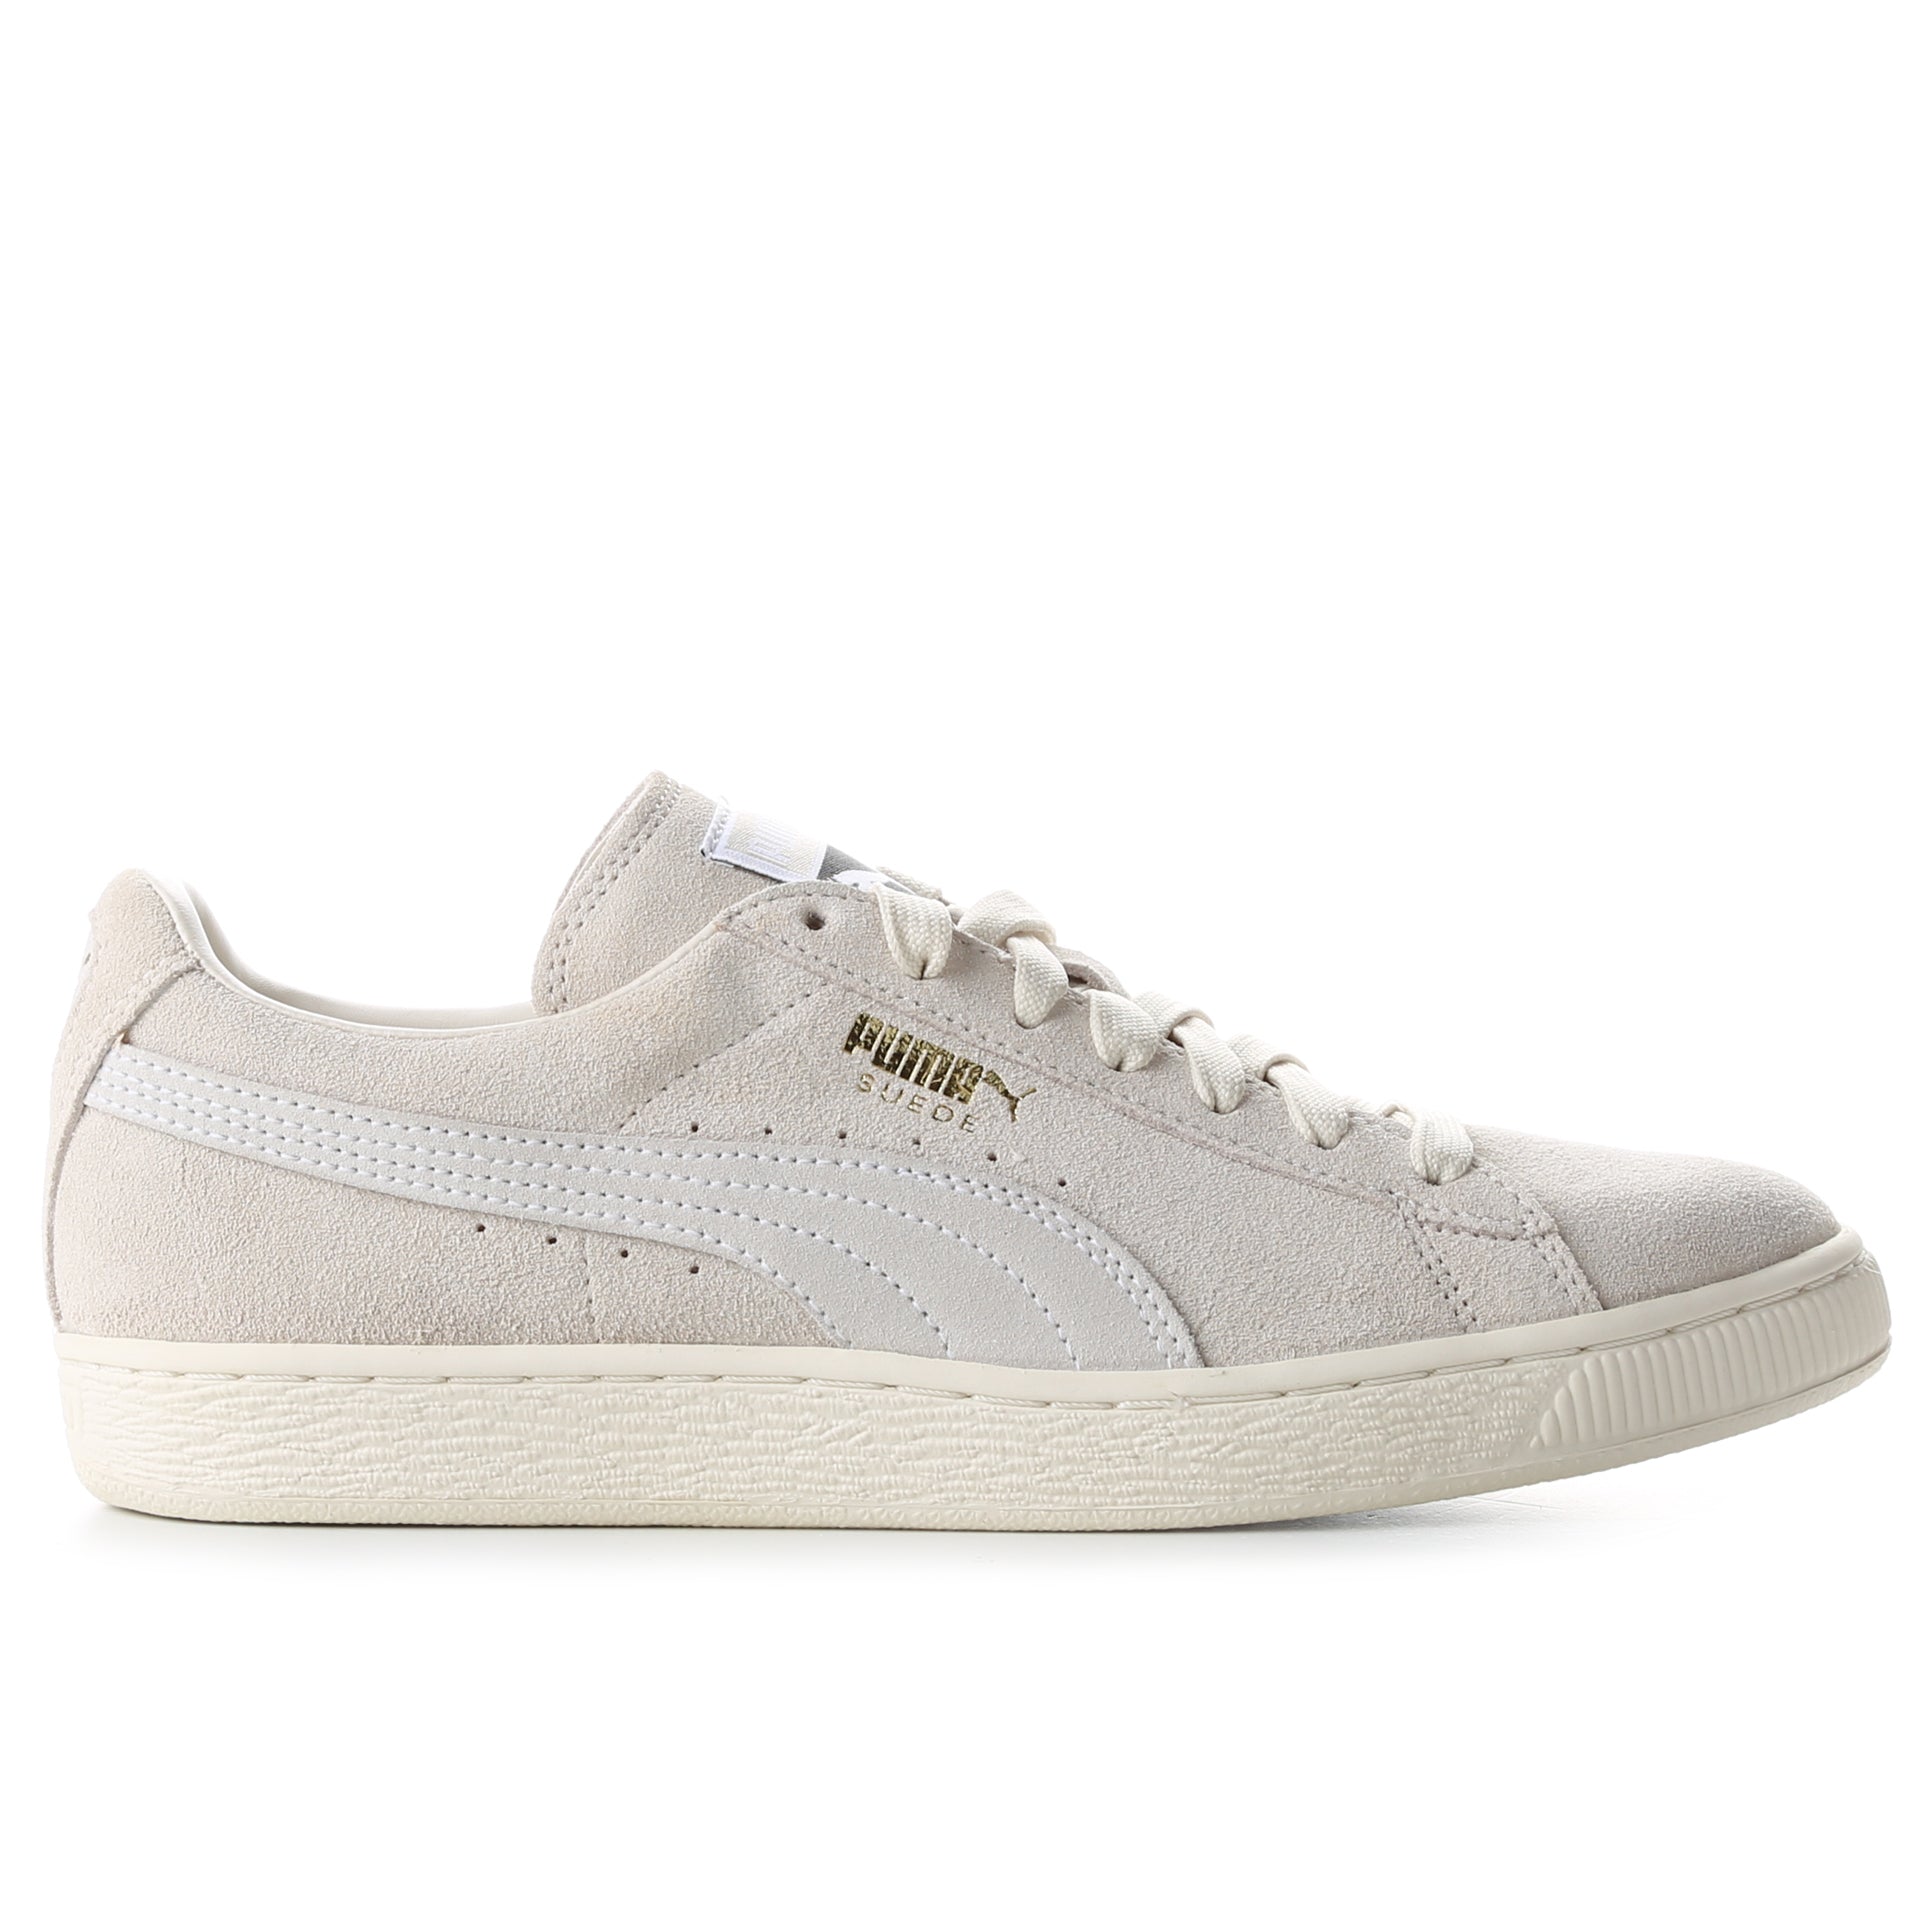 white puma suede sneakers